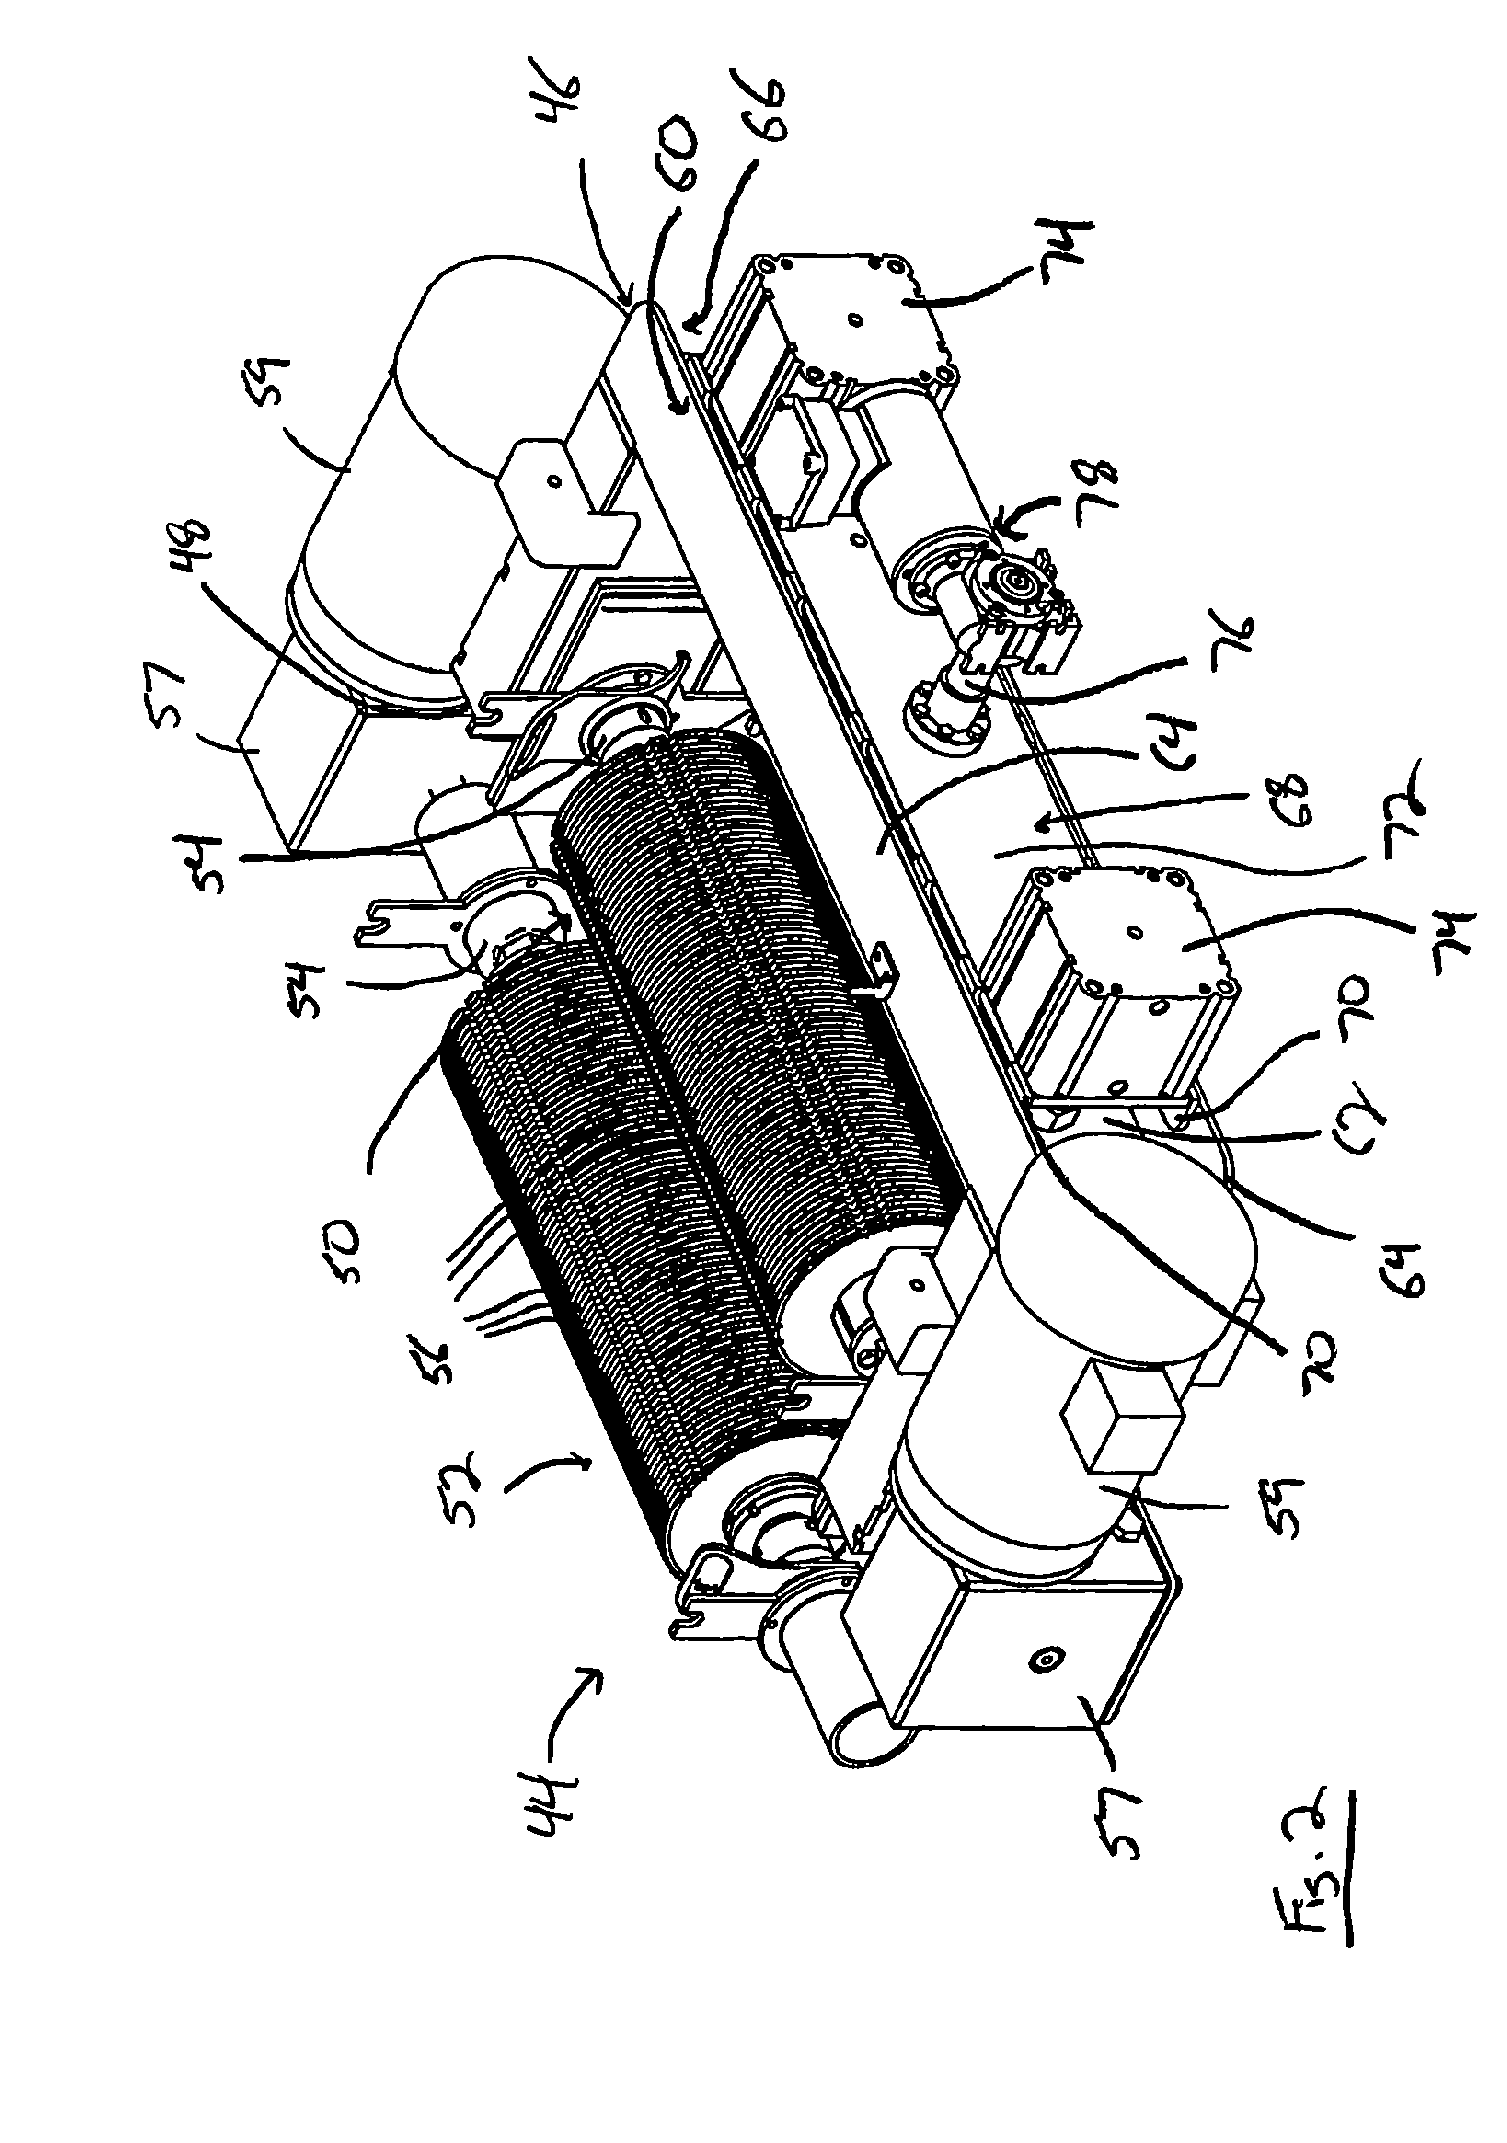 Macerator having automated roller spacing control